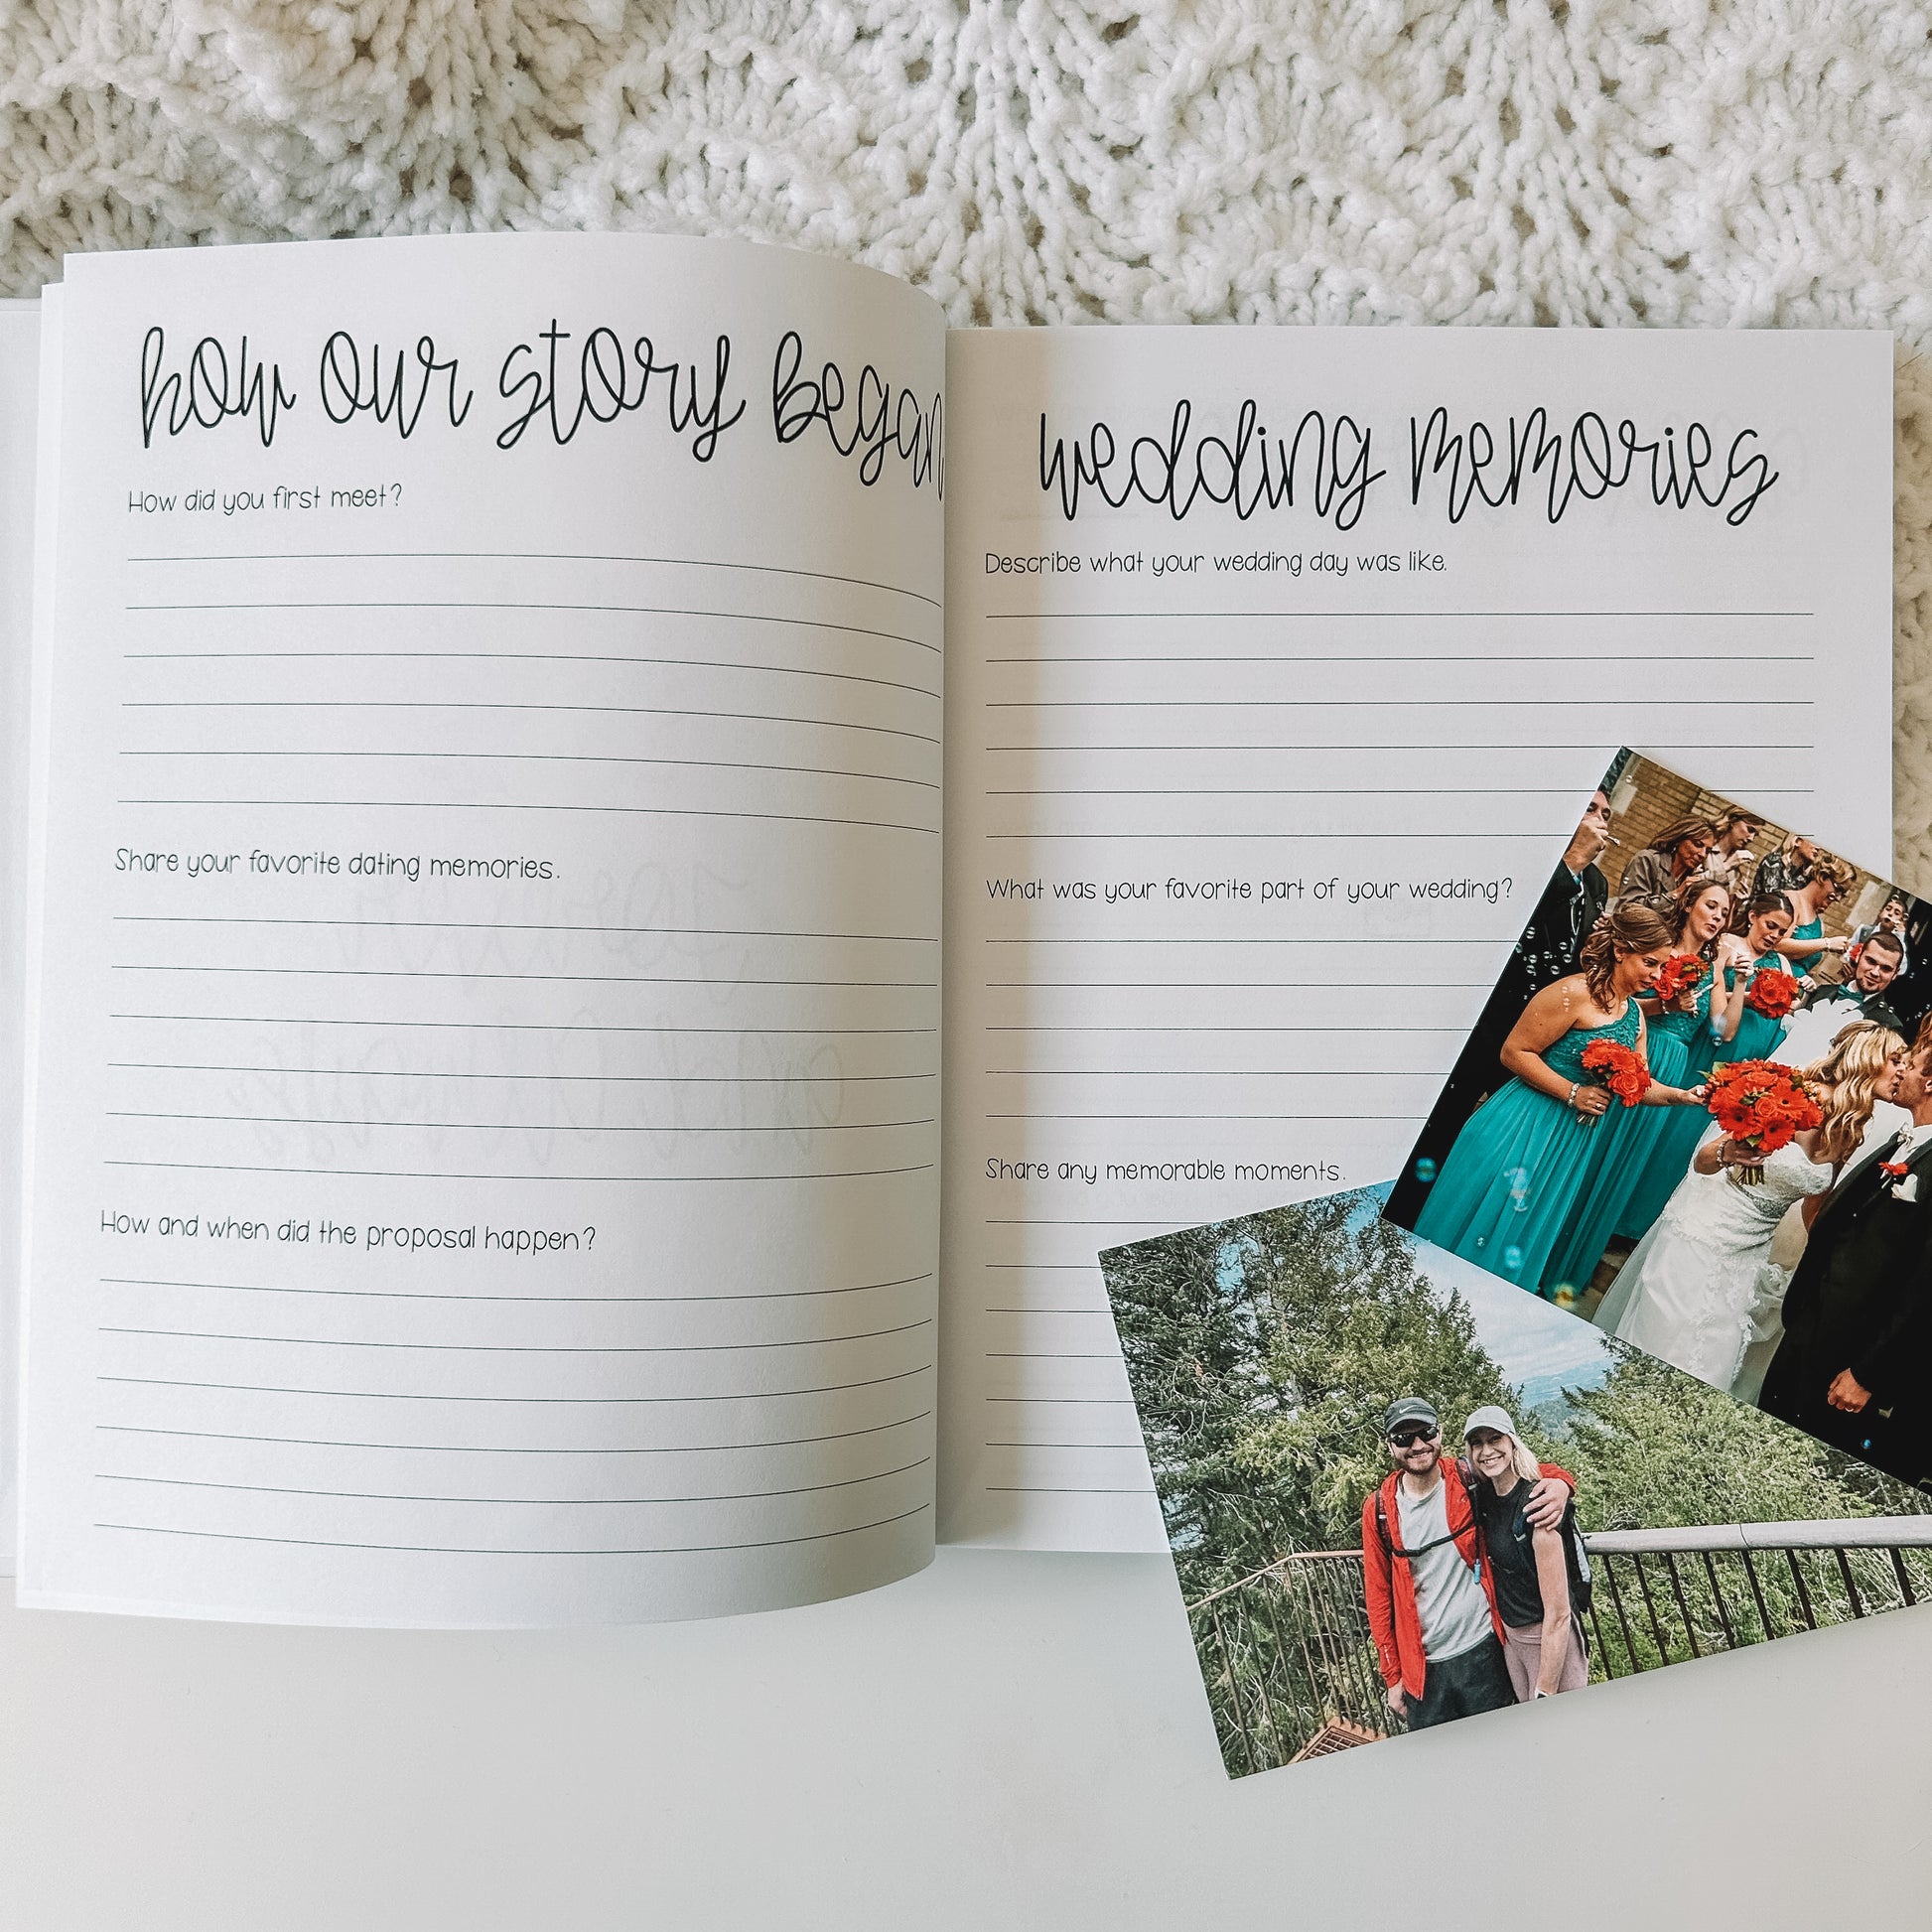 Two page spread in prompted anniversary journal. Left page is titled how our story began with prompts and lines beneath each prompt. Right page is titled wedding memories with prompts and lines beneath them. Photos of a couple are next to the book